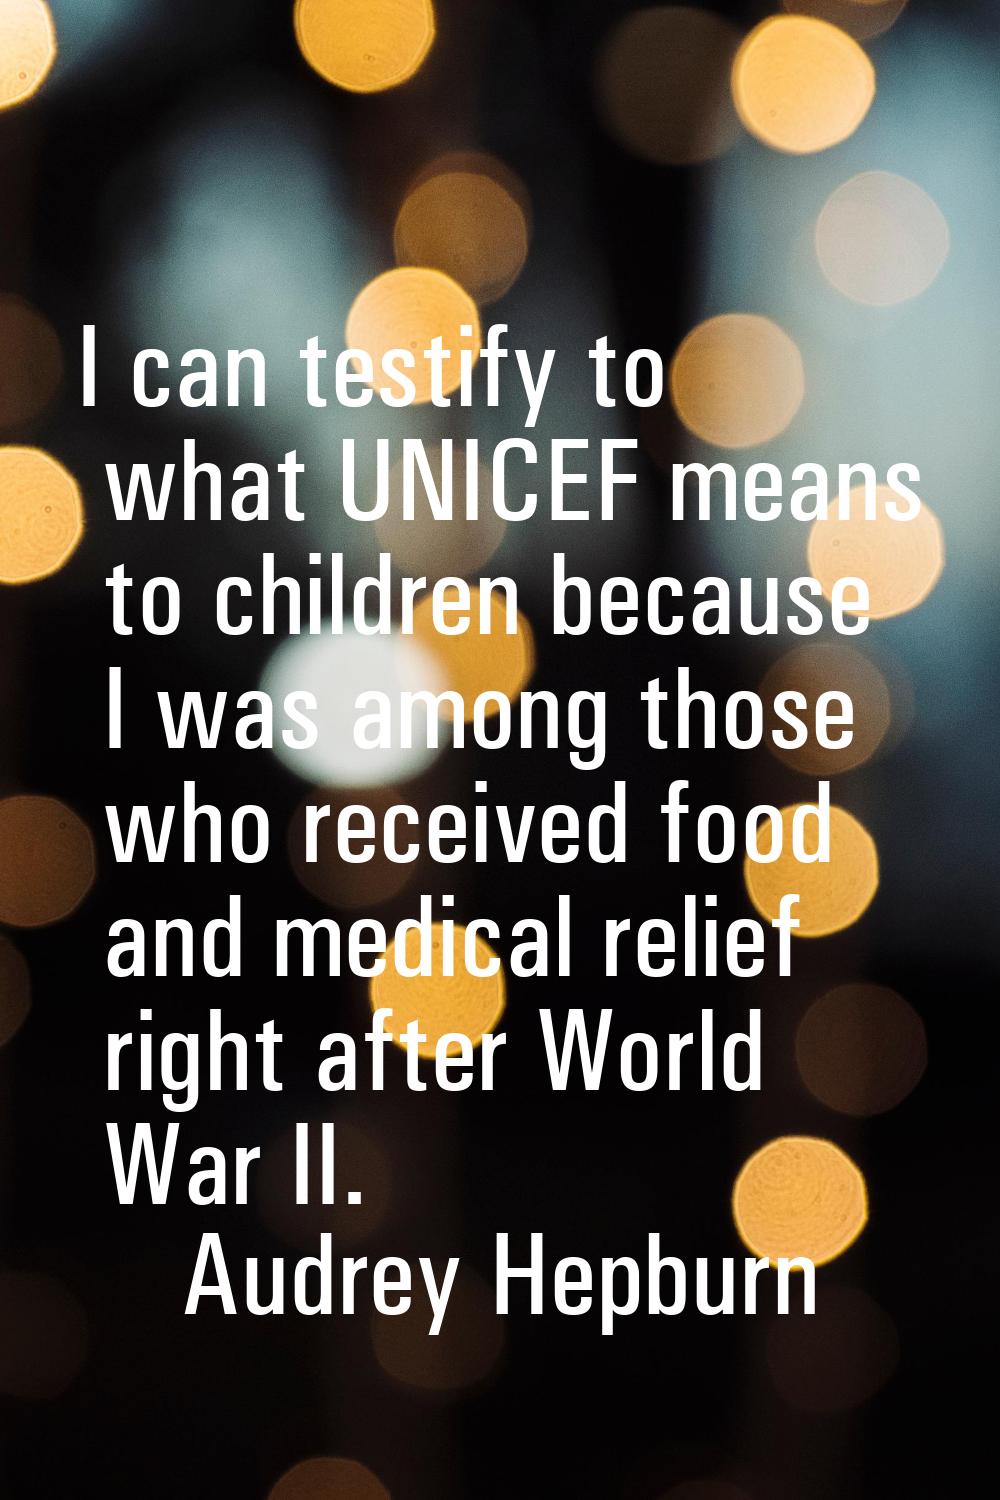 I can testify to what UNICEF means to children because I was among those who received food and medi